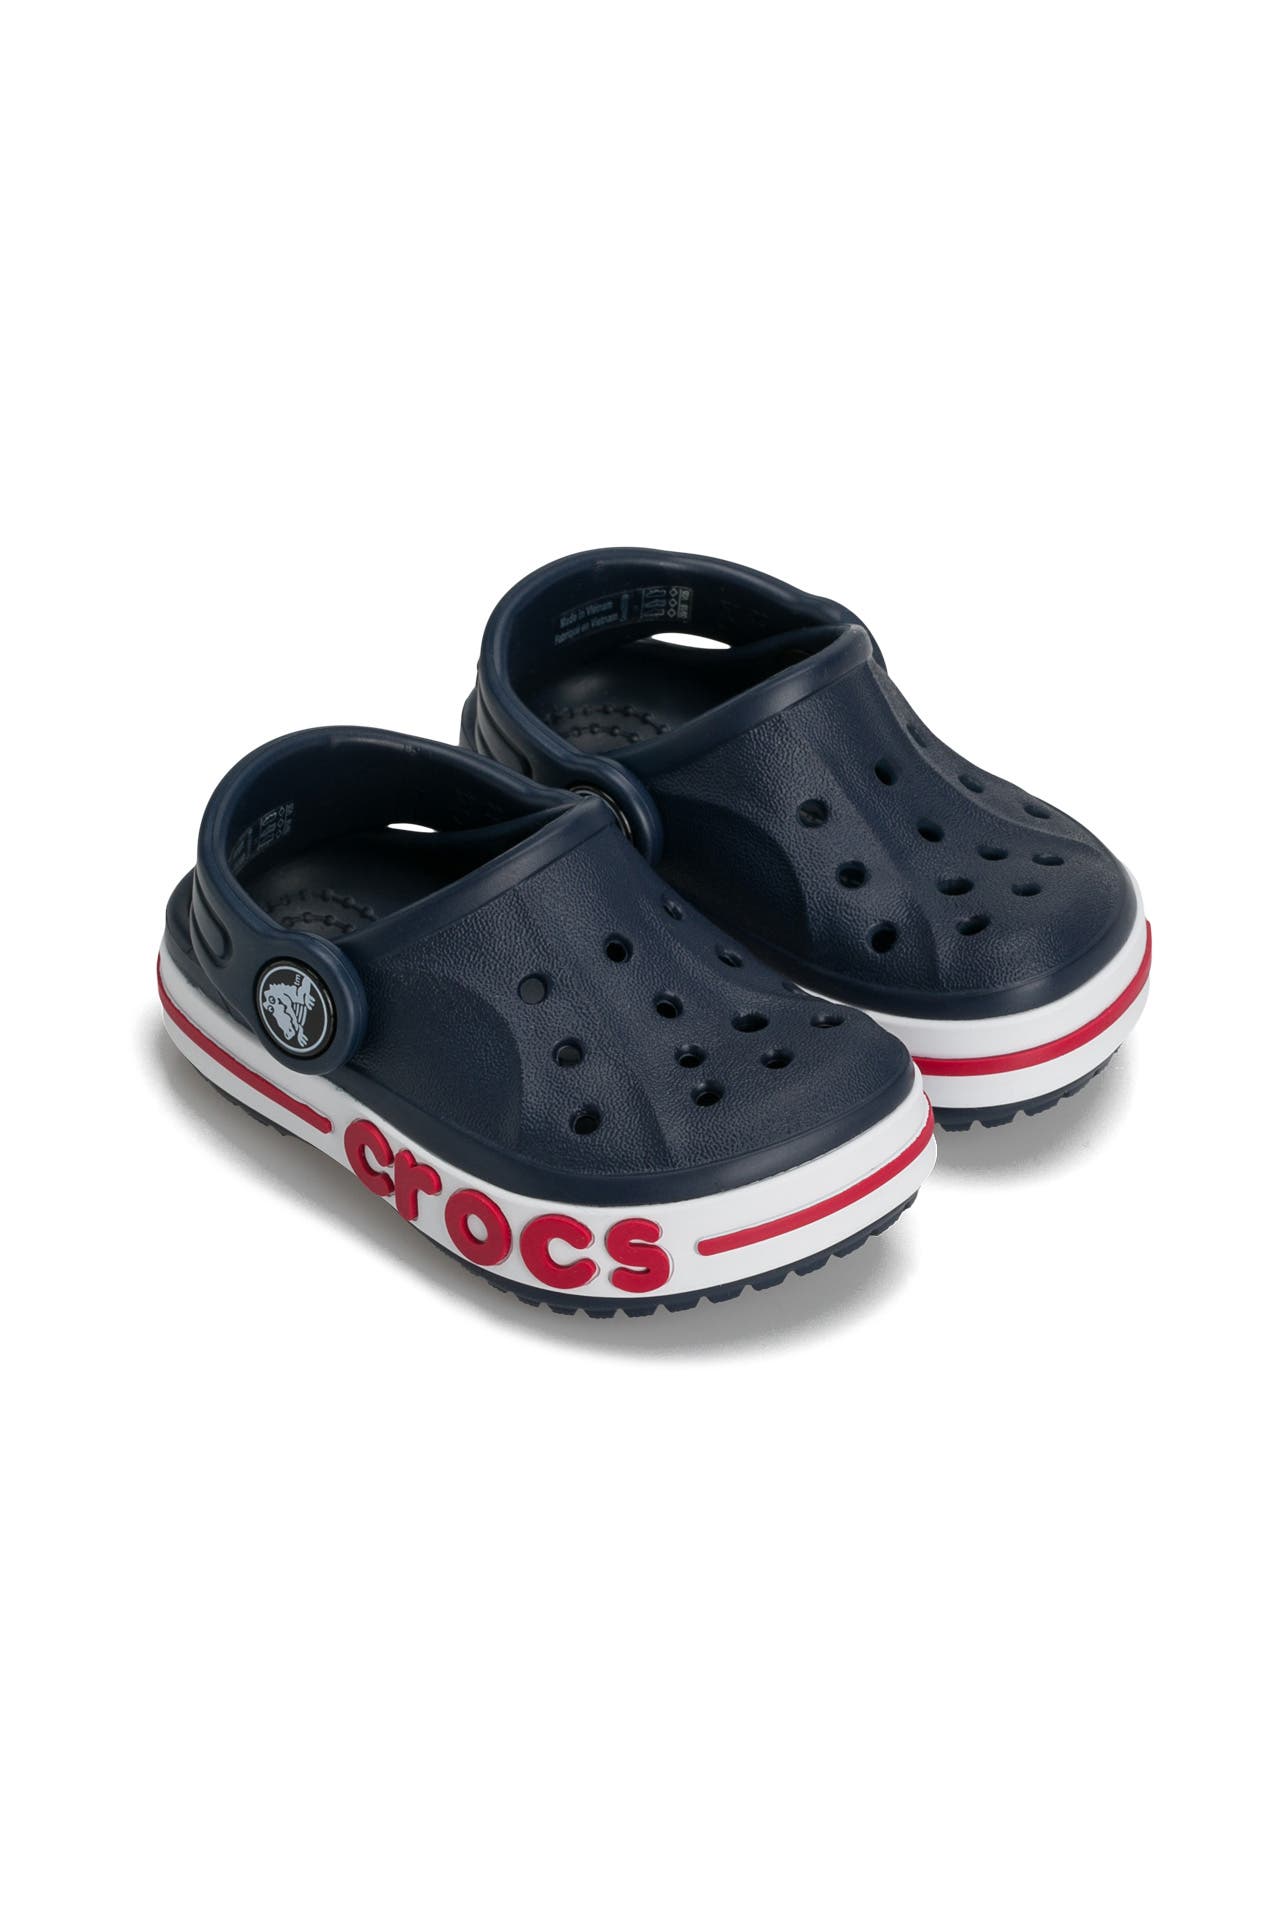 Crocs OUTLET in Germany • Sale up to 70%* off | Outletcity Metzingen